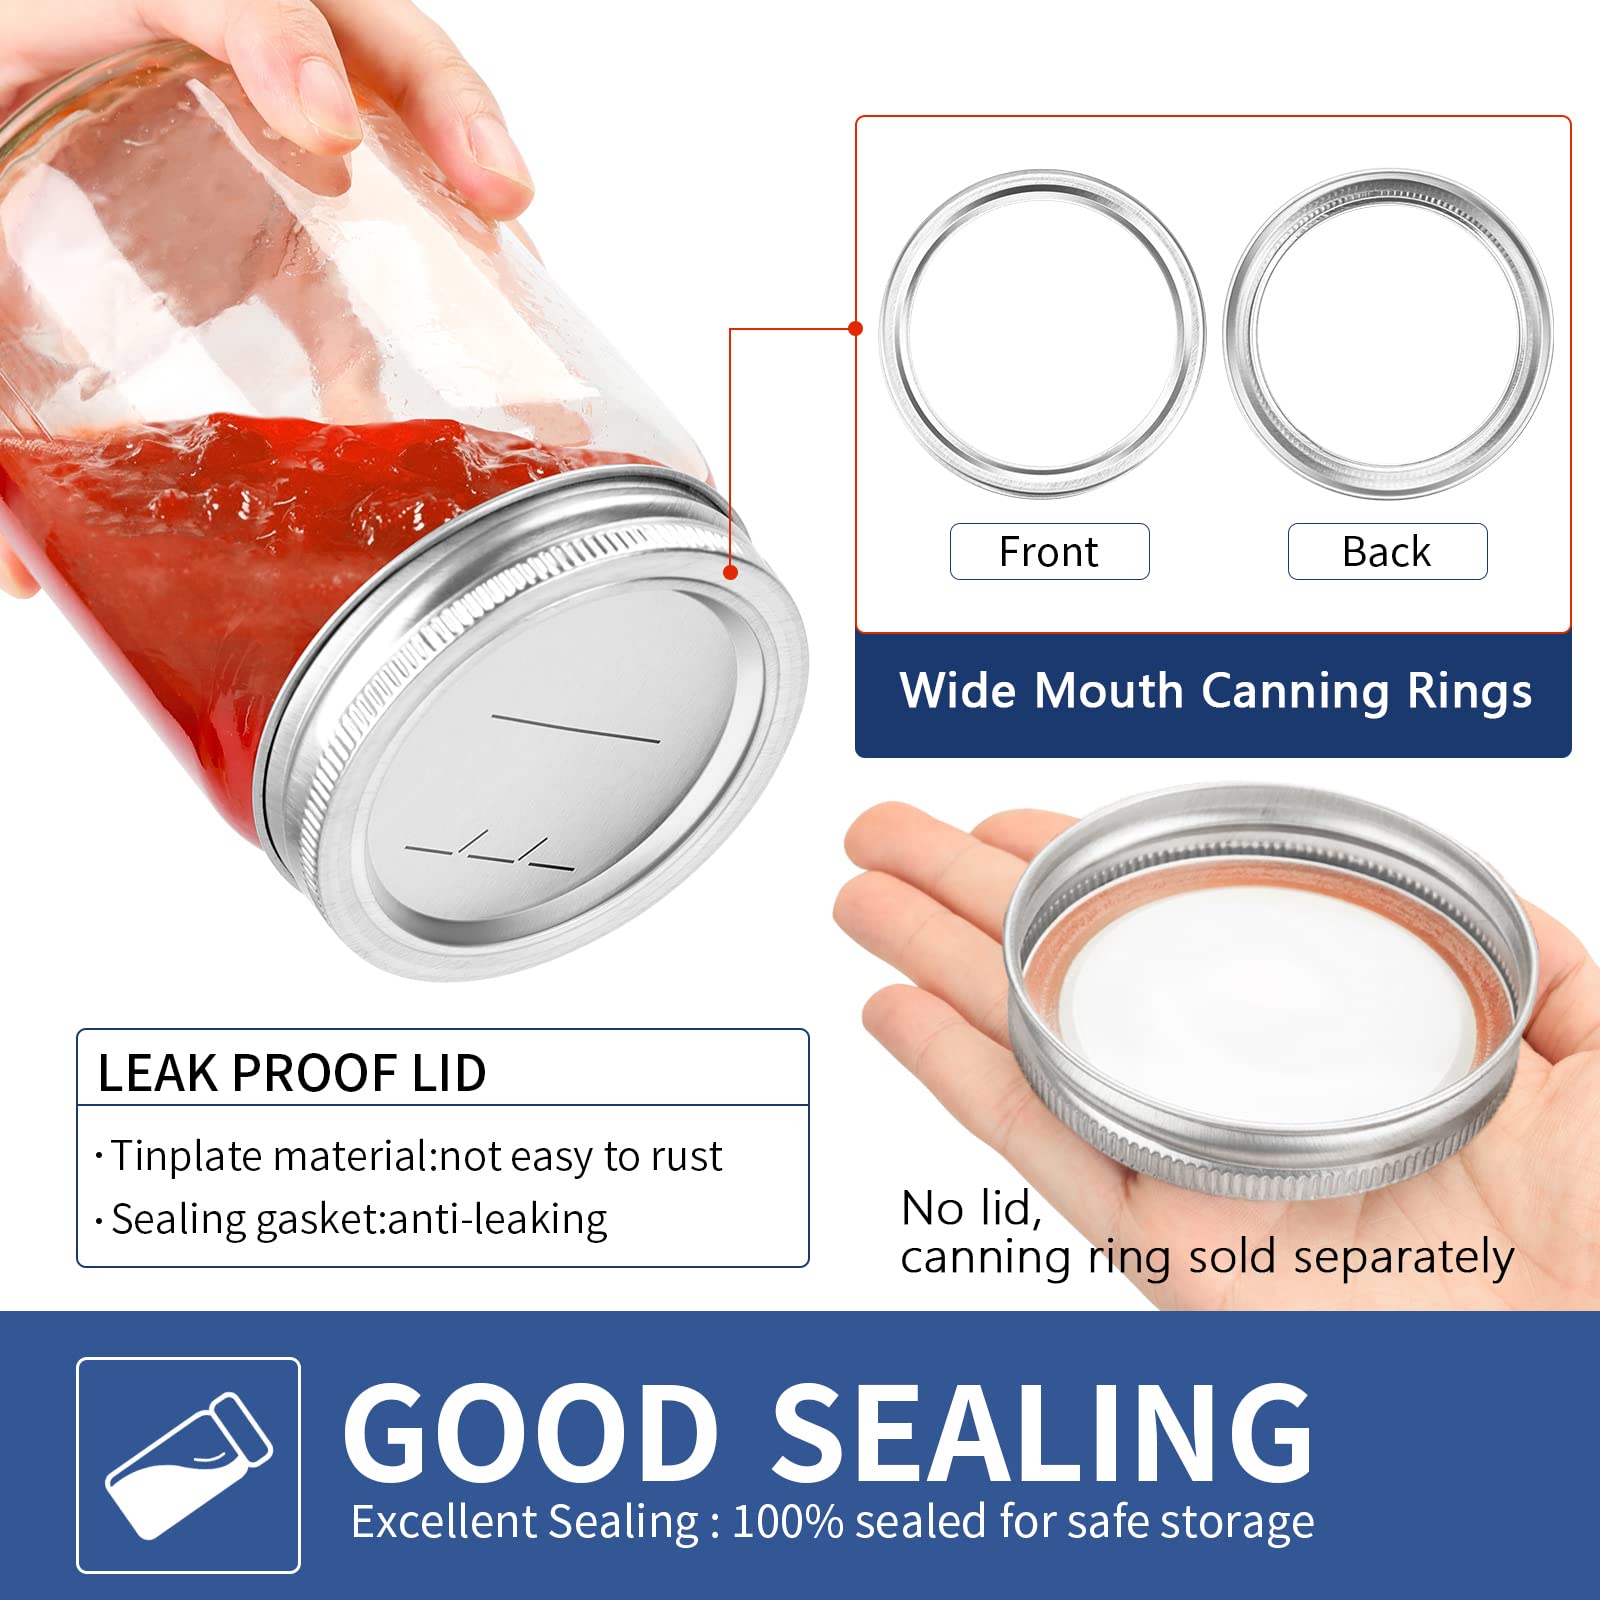 48 PCS Wide Mouth Canning Rings, Wide Mouth Mason Jar Rings - Split-Type Seals Jar Rings, Replacement Metal Rings Rust Proof Leak Proof Screw Bands for Wide Mouth Jar